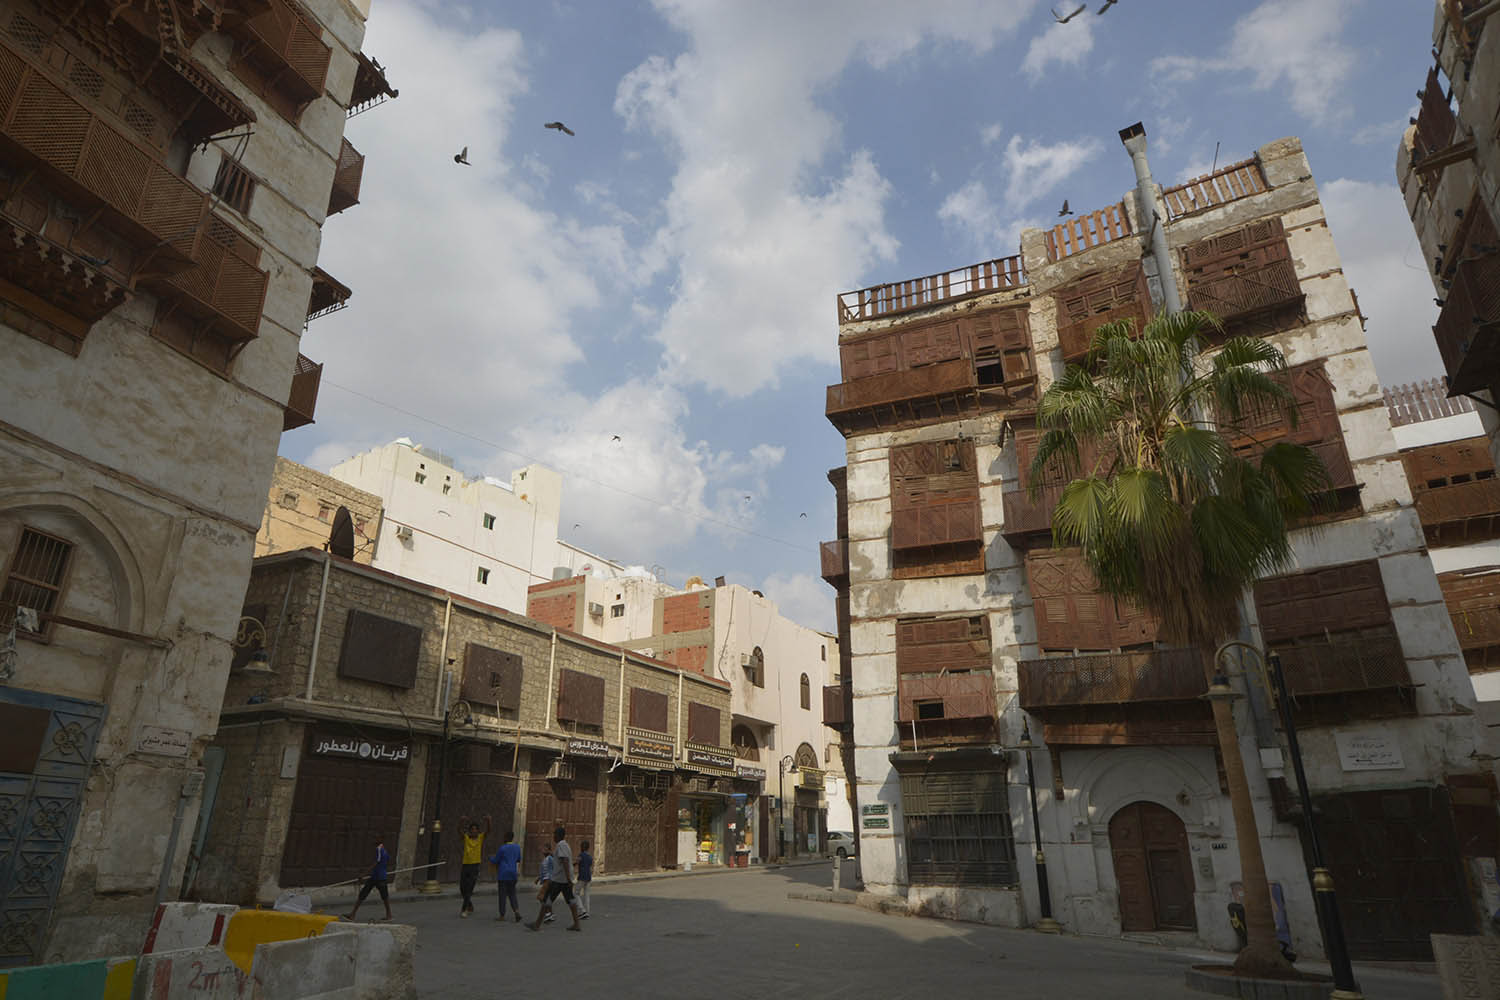 Street view with facades from al Balad, the historic heart of Jiddah